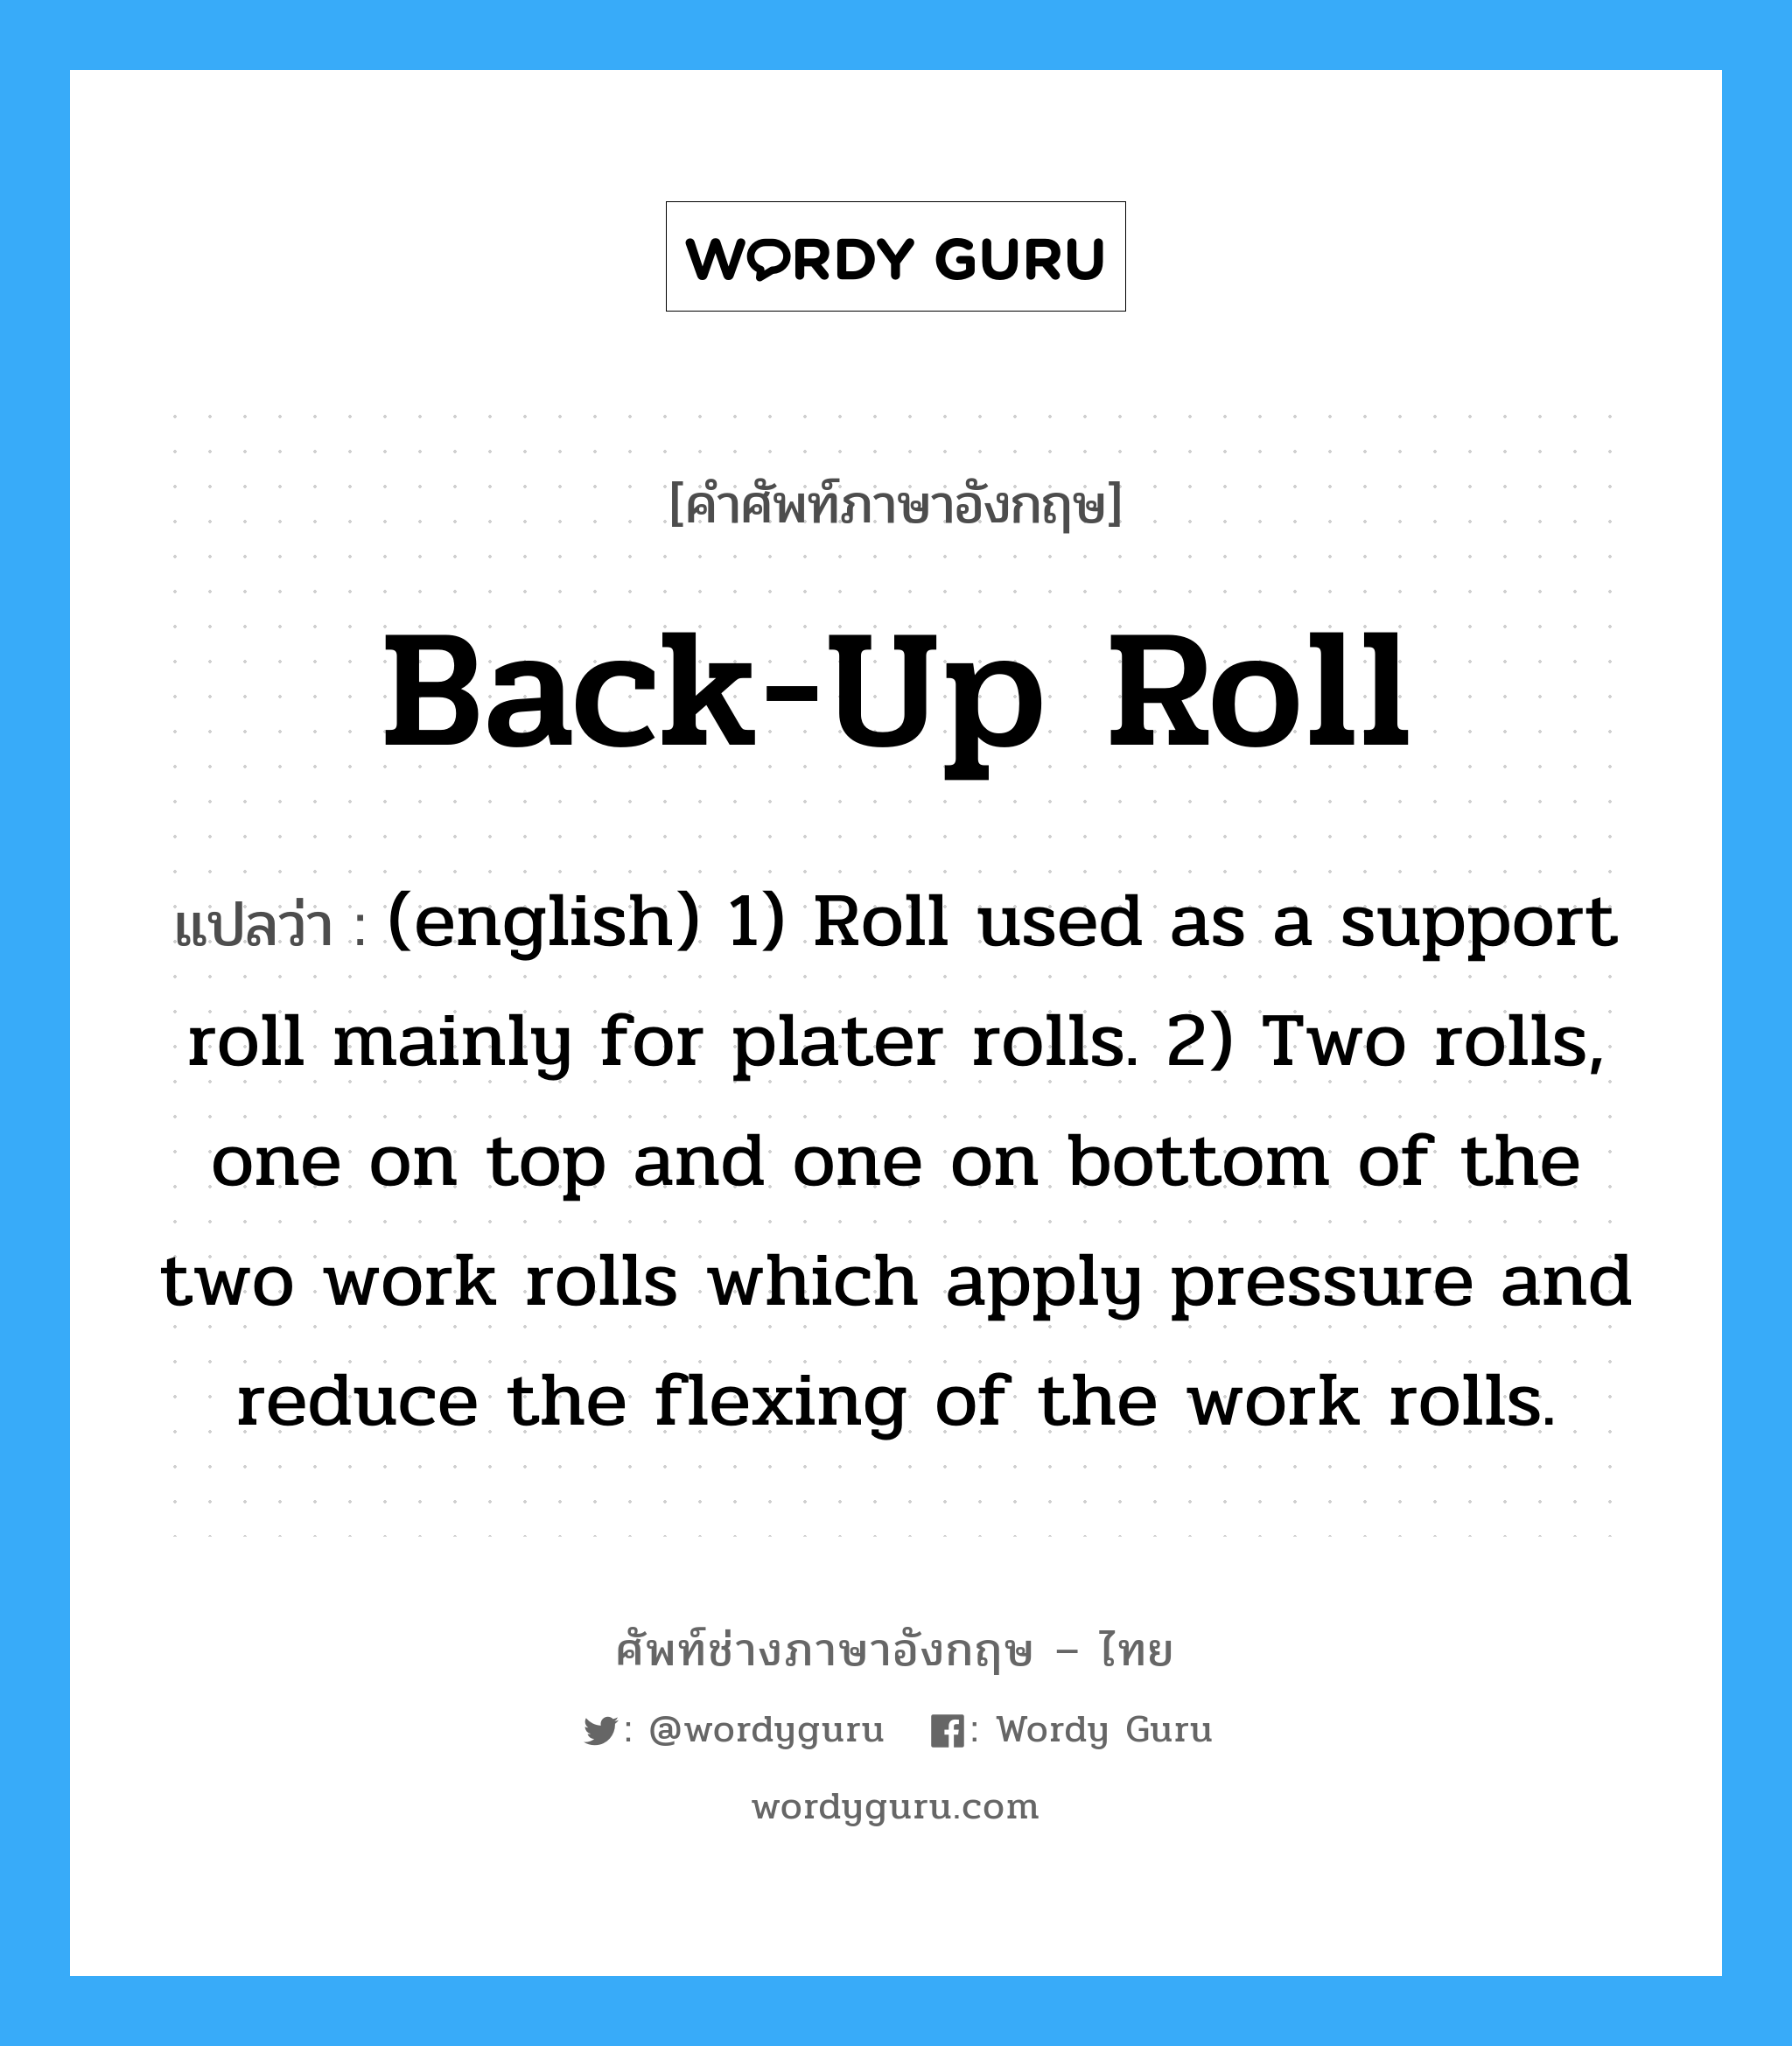 Back-up Roll แปลว่า?, คำศัพท์ช่างภาษาอังกฤษ - ไทย Back-up Roll คำศัพท์ภาษาอังกฤษ Back-up Roll แปลว่า (english) 1) Roll used as a support roll mainly for plater rolls. 2) Two rolls, one on top and one on bottom of the two work rolls which apply pressure and reduce the flexing of the work rolls.